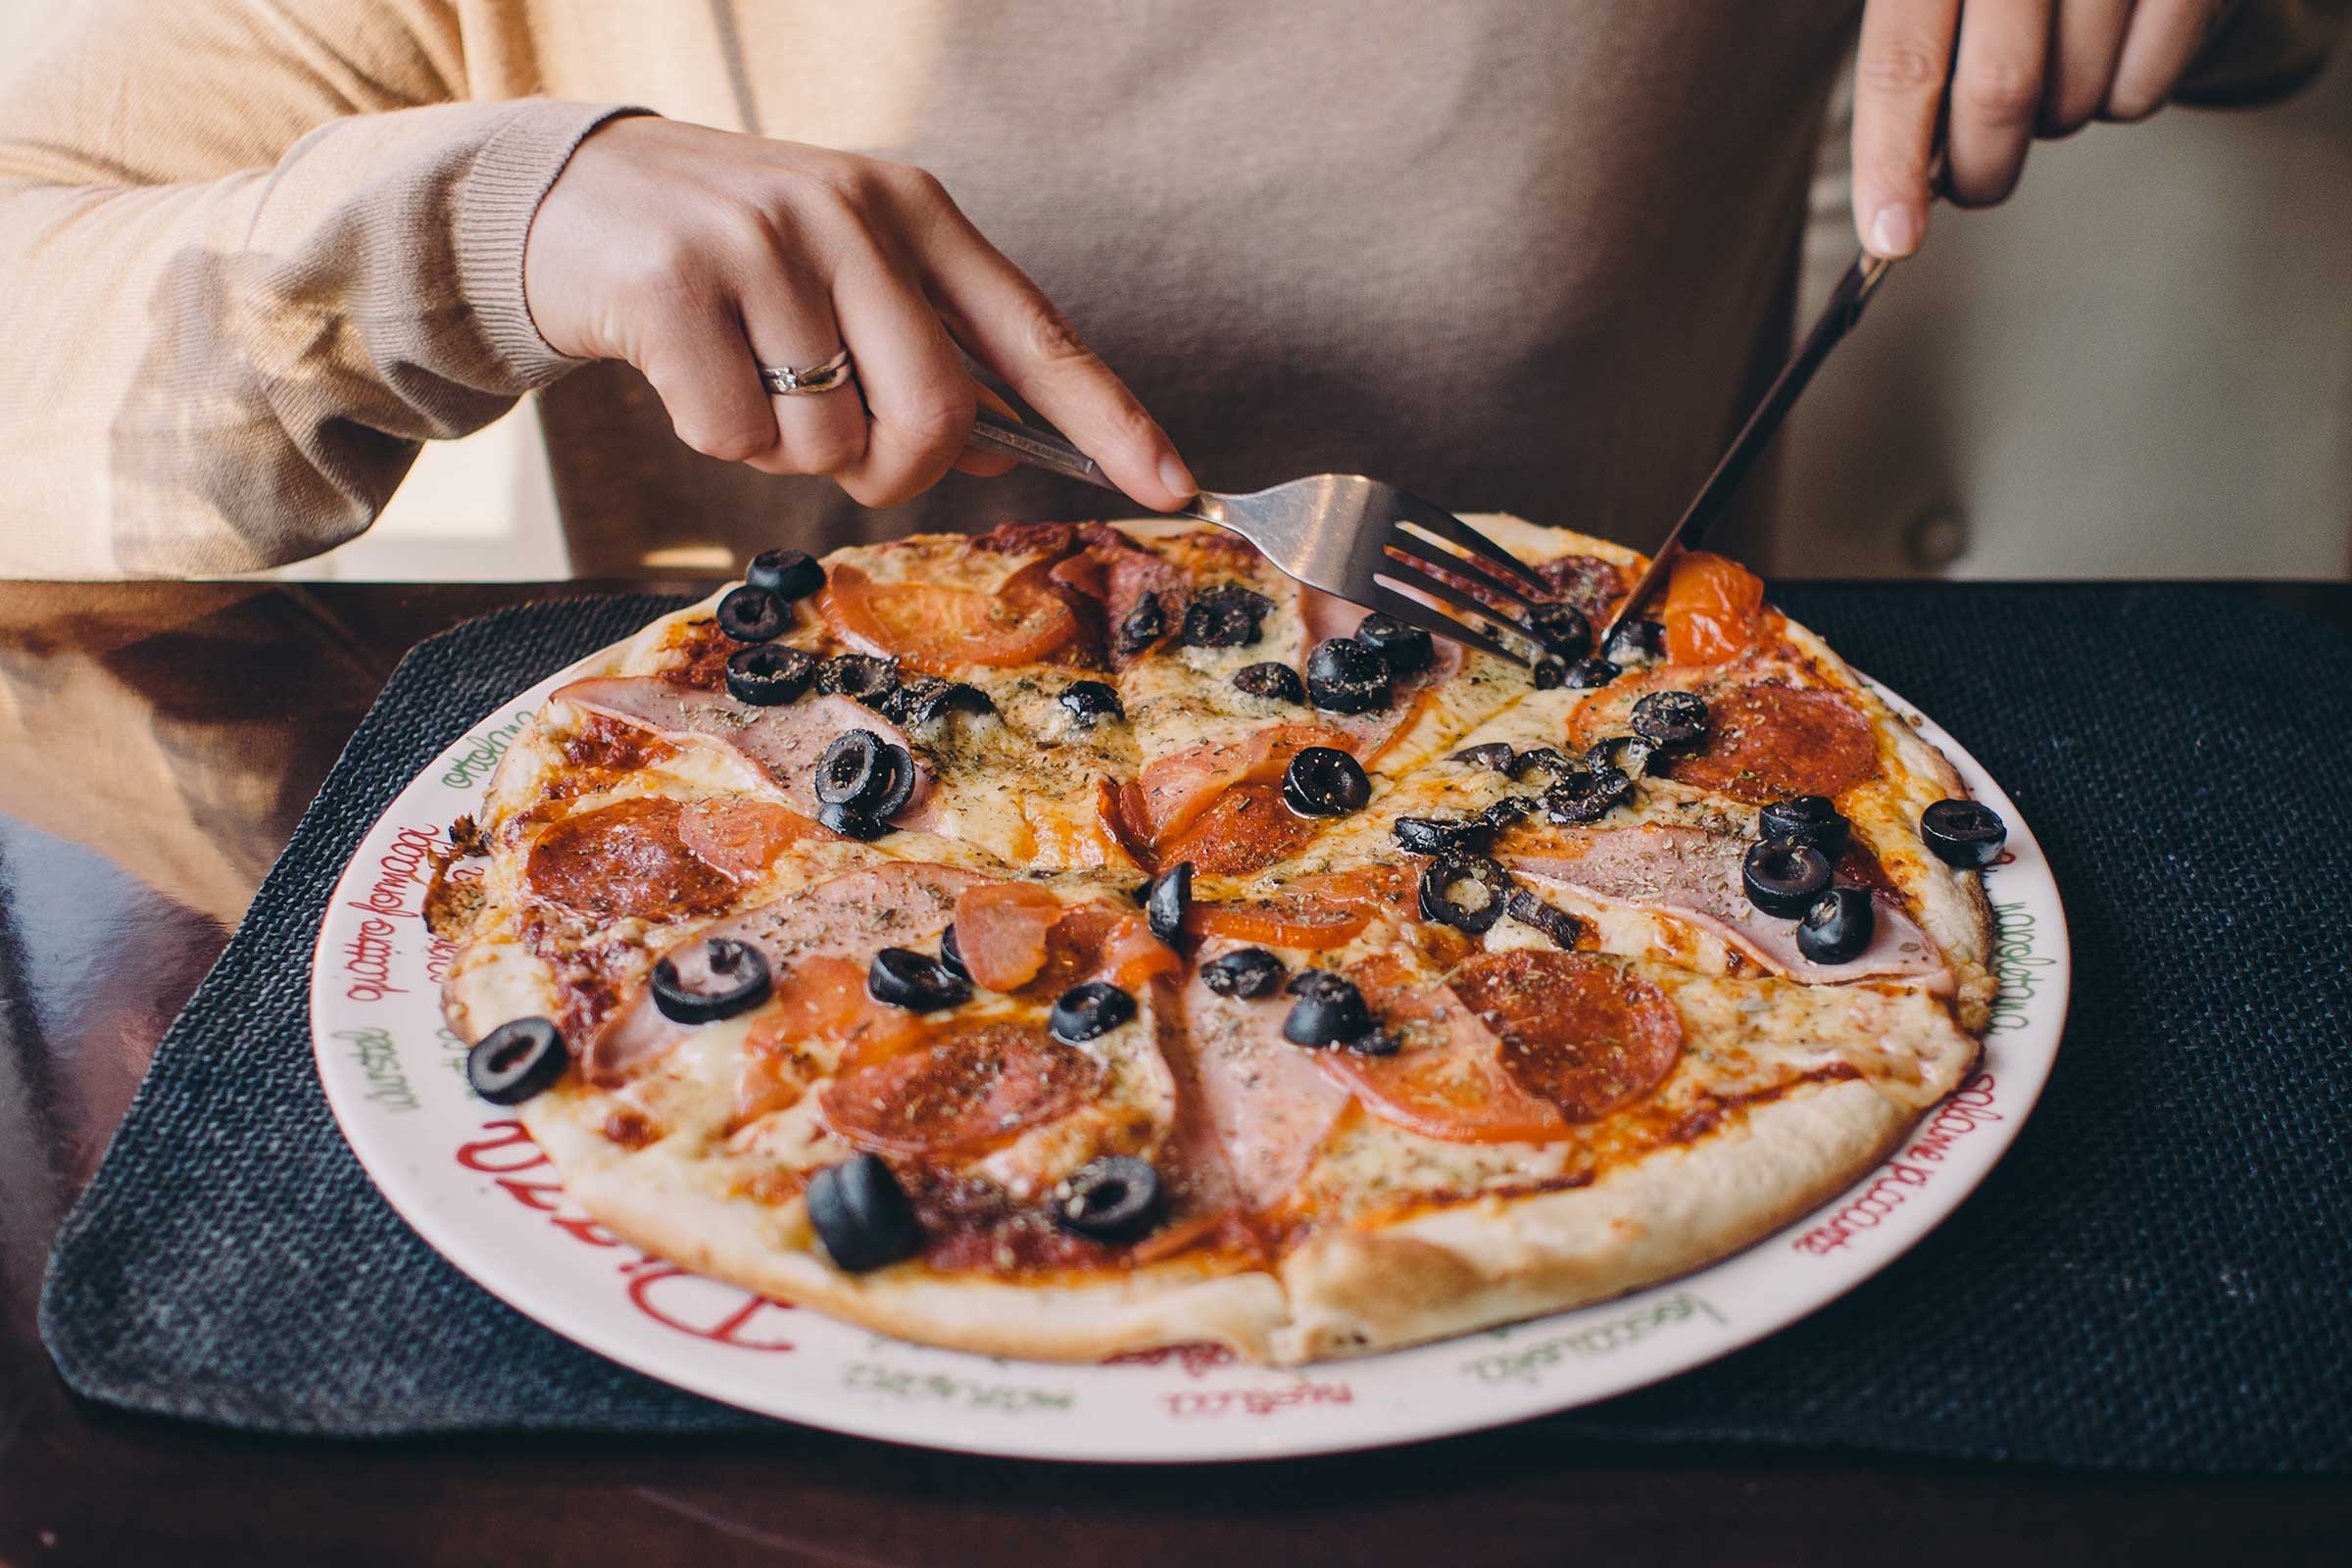 5 Facts About Pizza You Should Know